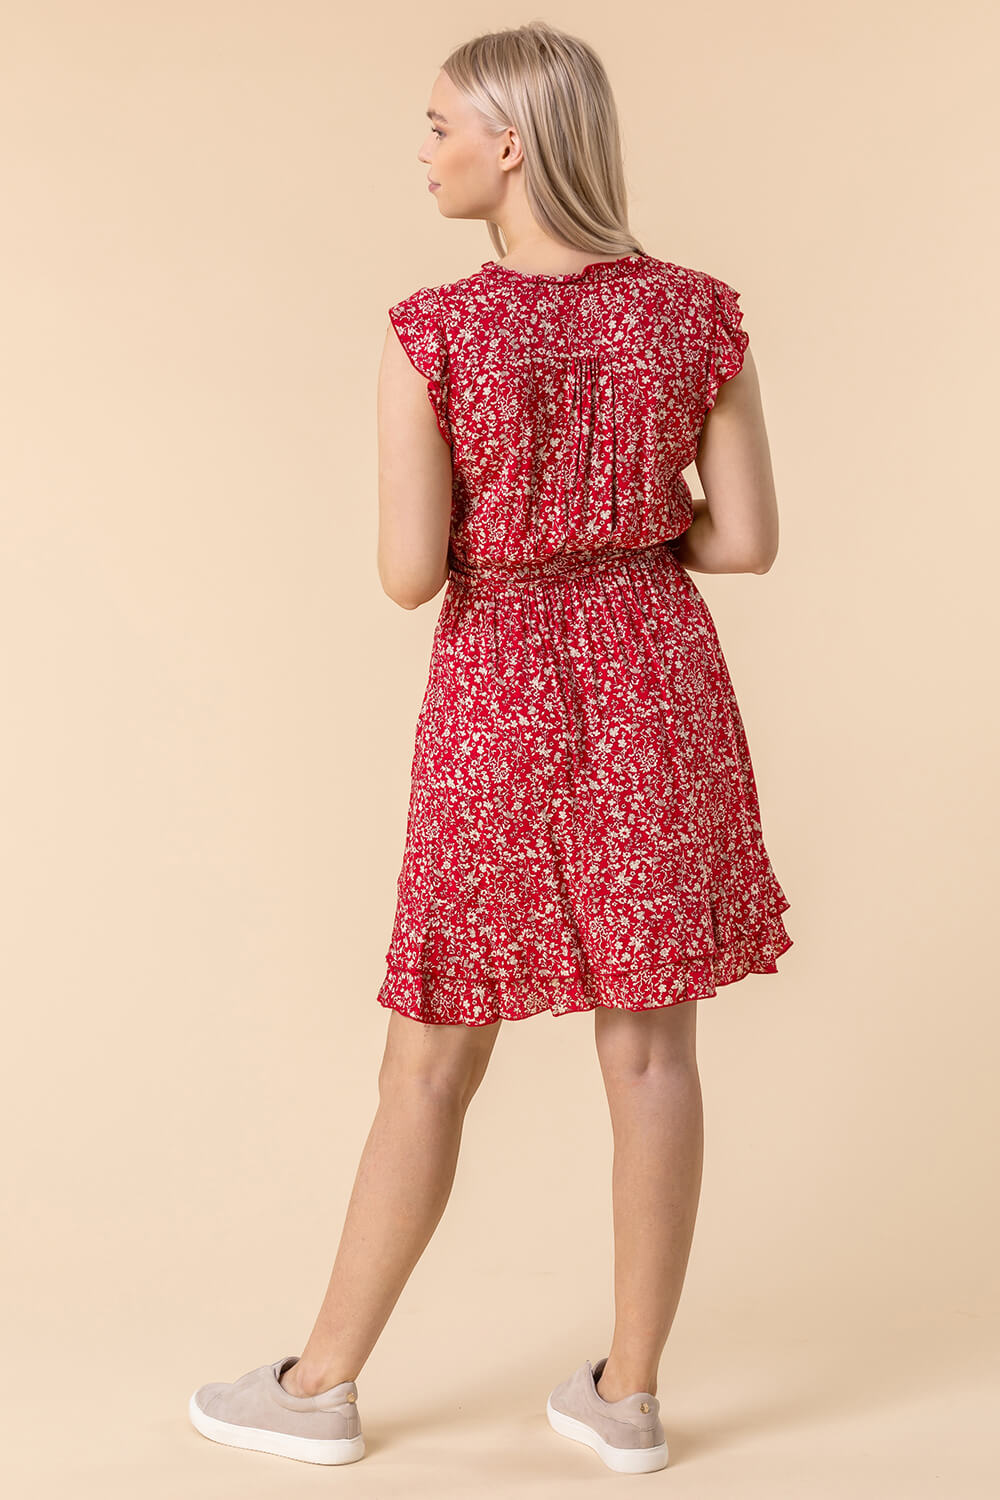 Red Floral Wrap Frill Dress, Image 2 of 5